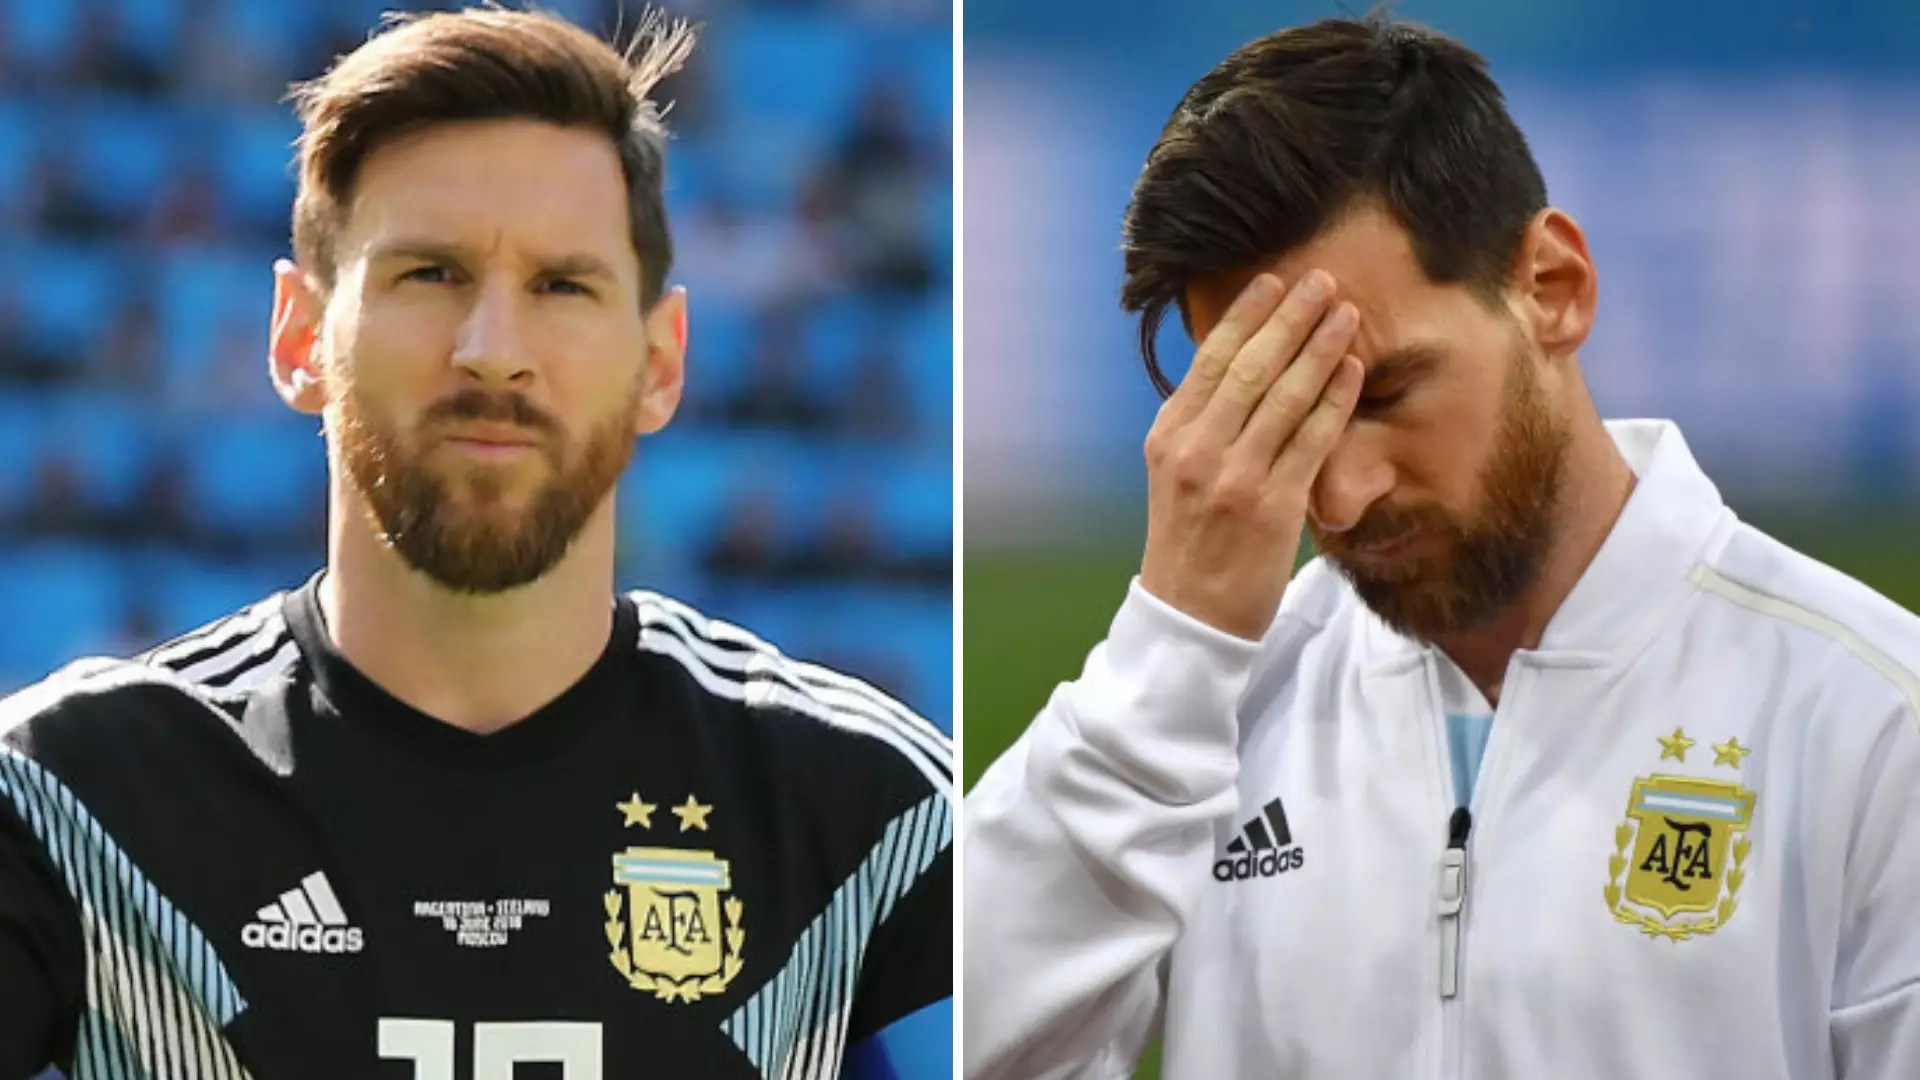 The Two Other Countries That Lionel Messi Could Have Played For Instead Of Argentina